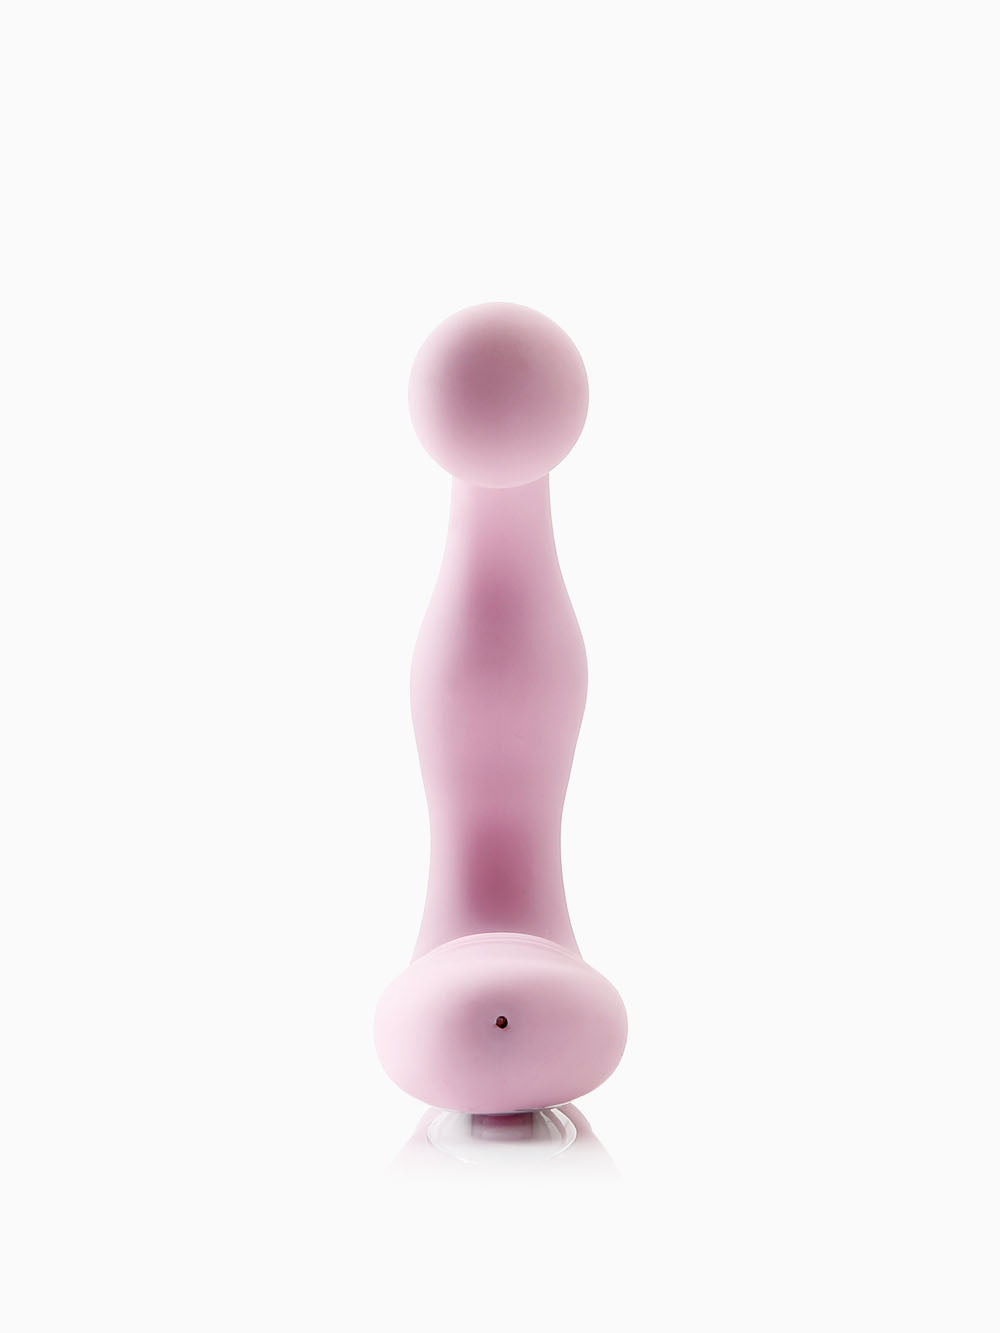 Pillow Talk Wearable G Spot & Clitoral Vibrator Pink, 3.75 Inches